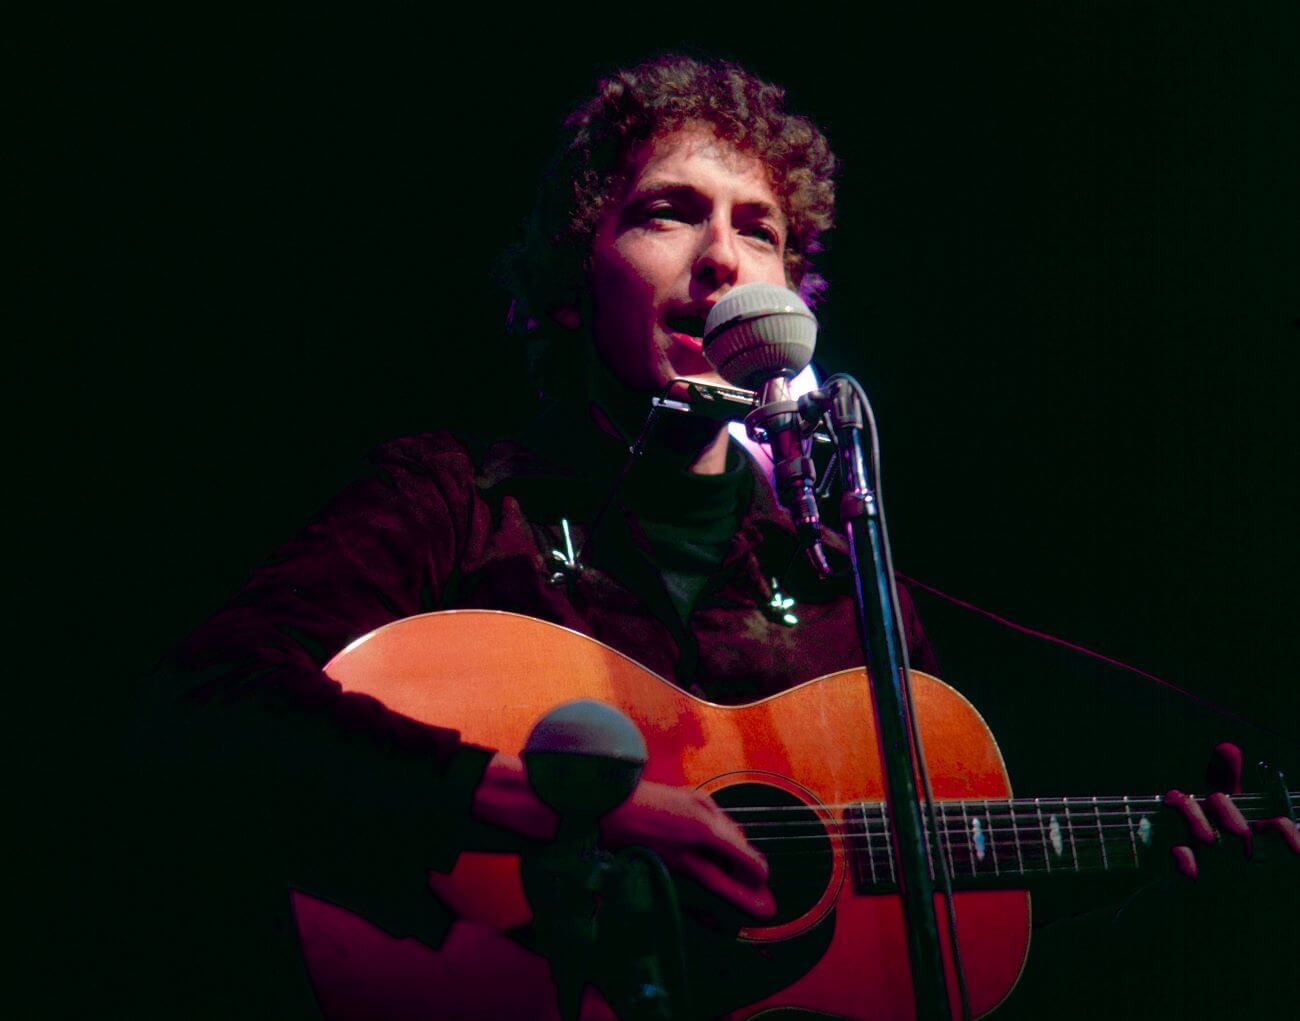 Bob Dylan holds a guitar and sings into a microphone.